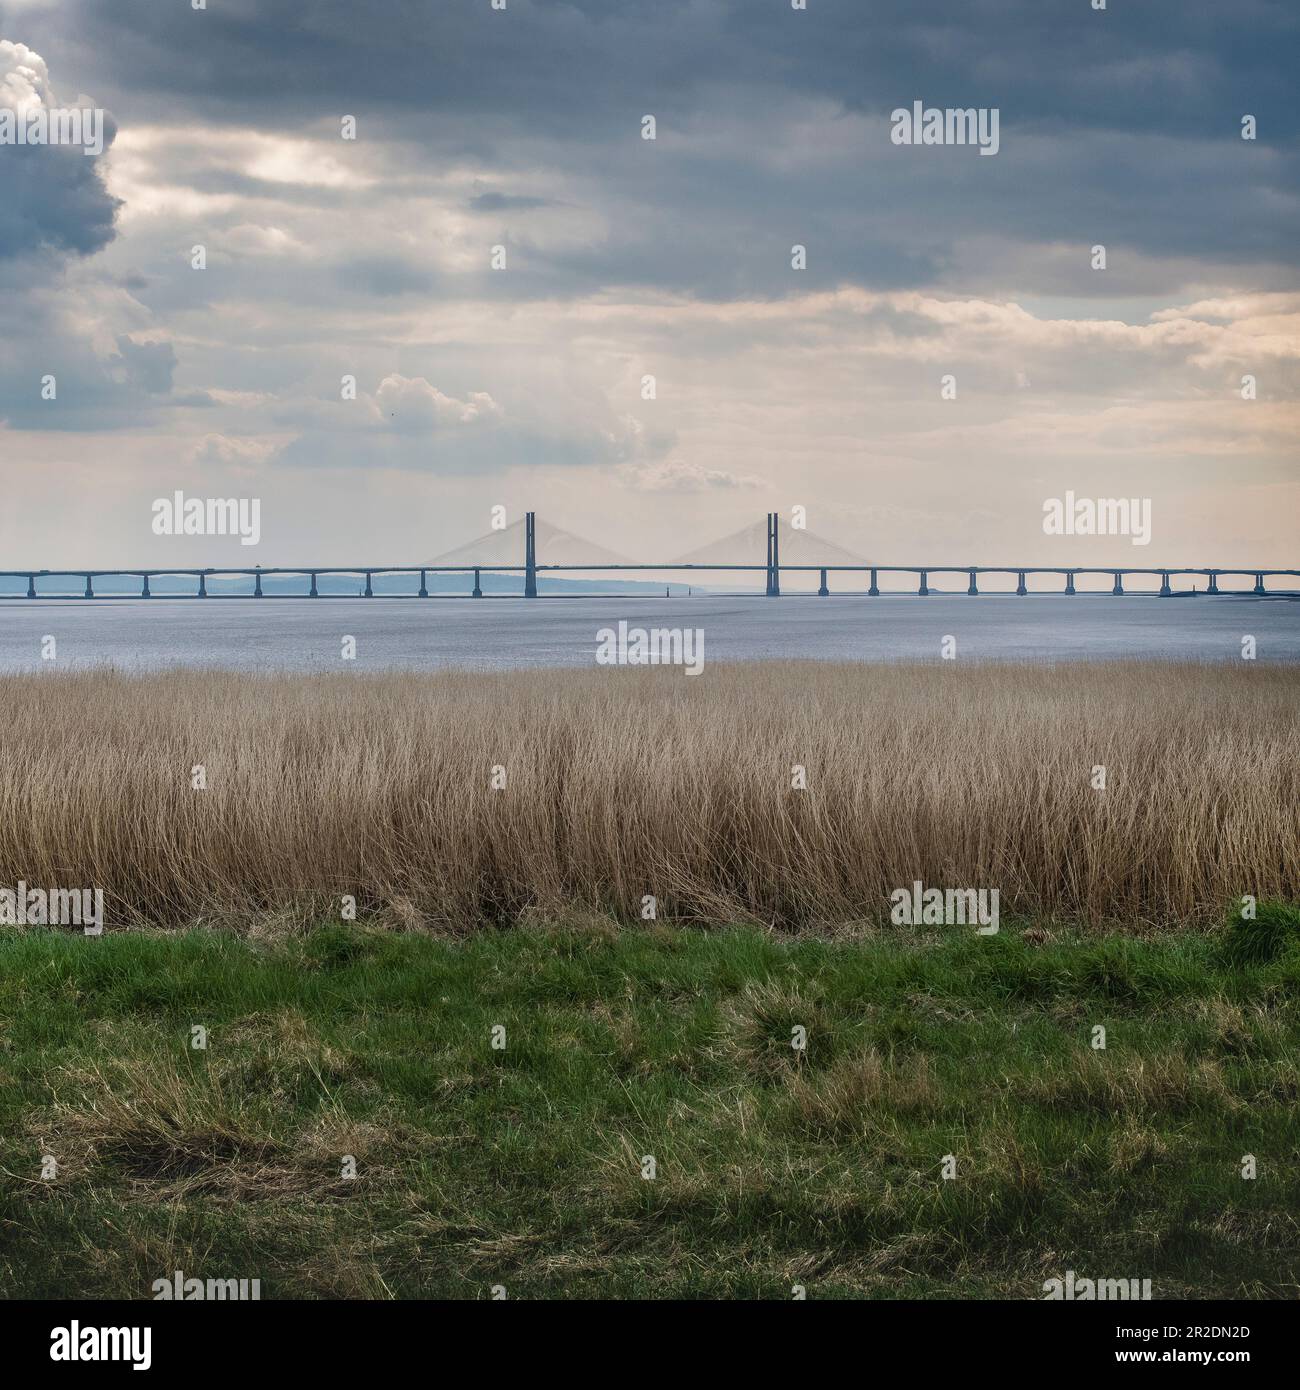 Severn Crossing ou Severn Bridge Prince of Wales Crossing et Severn Estuary England Wales Banque D'Images